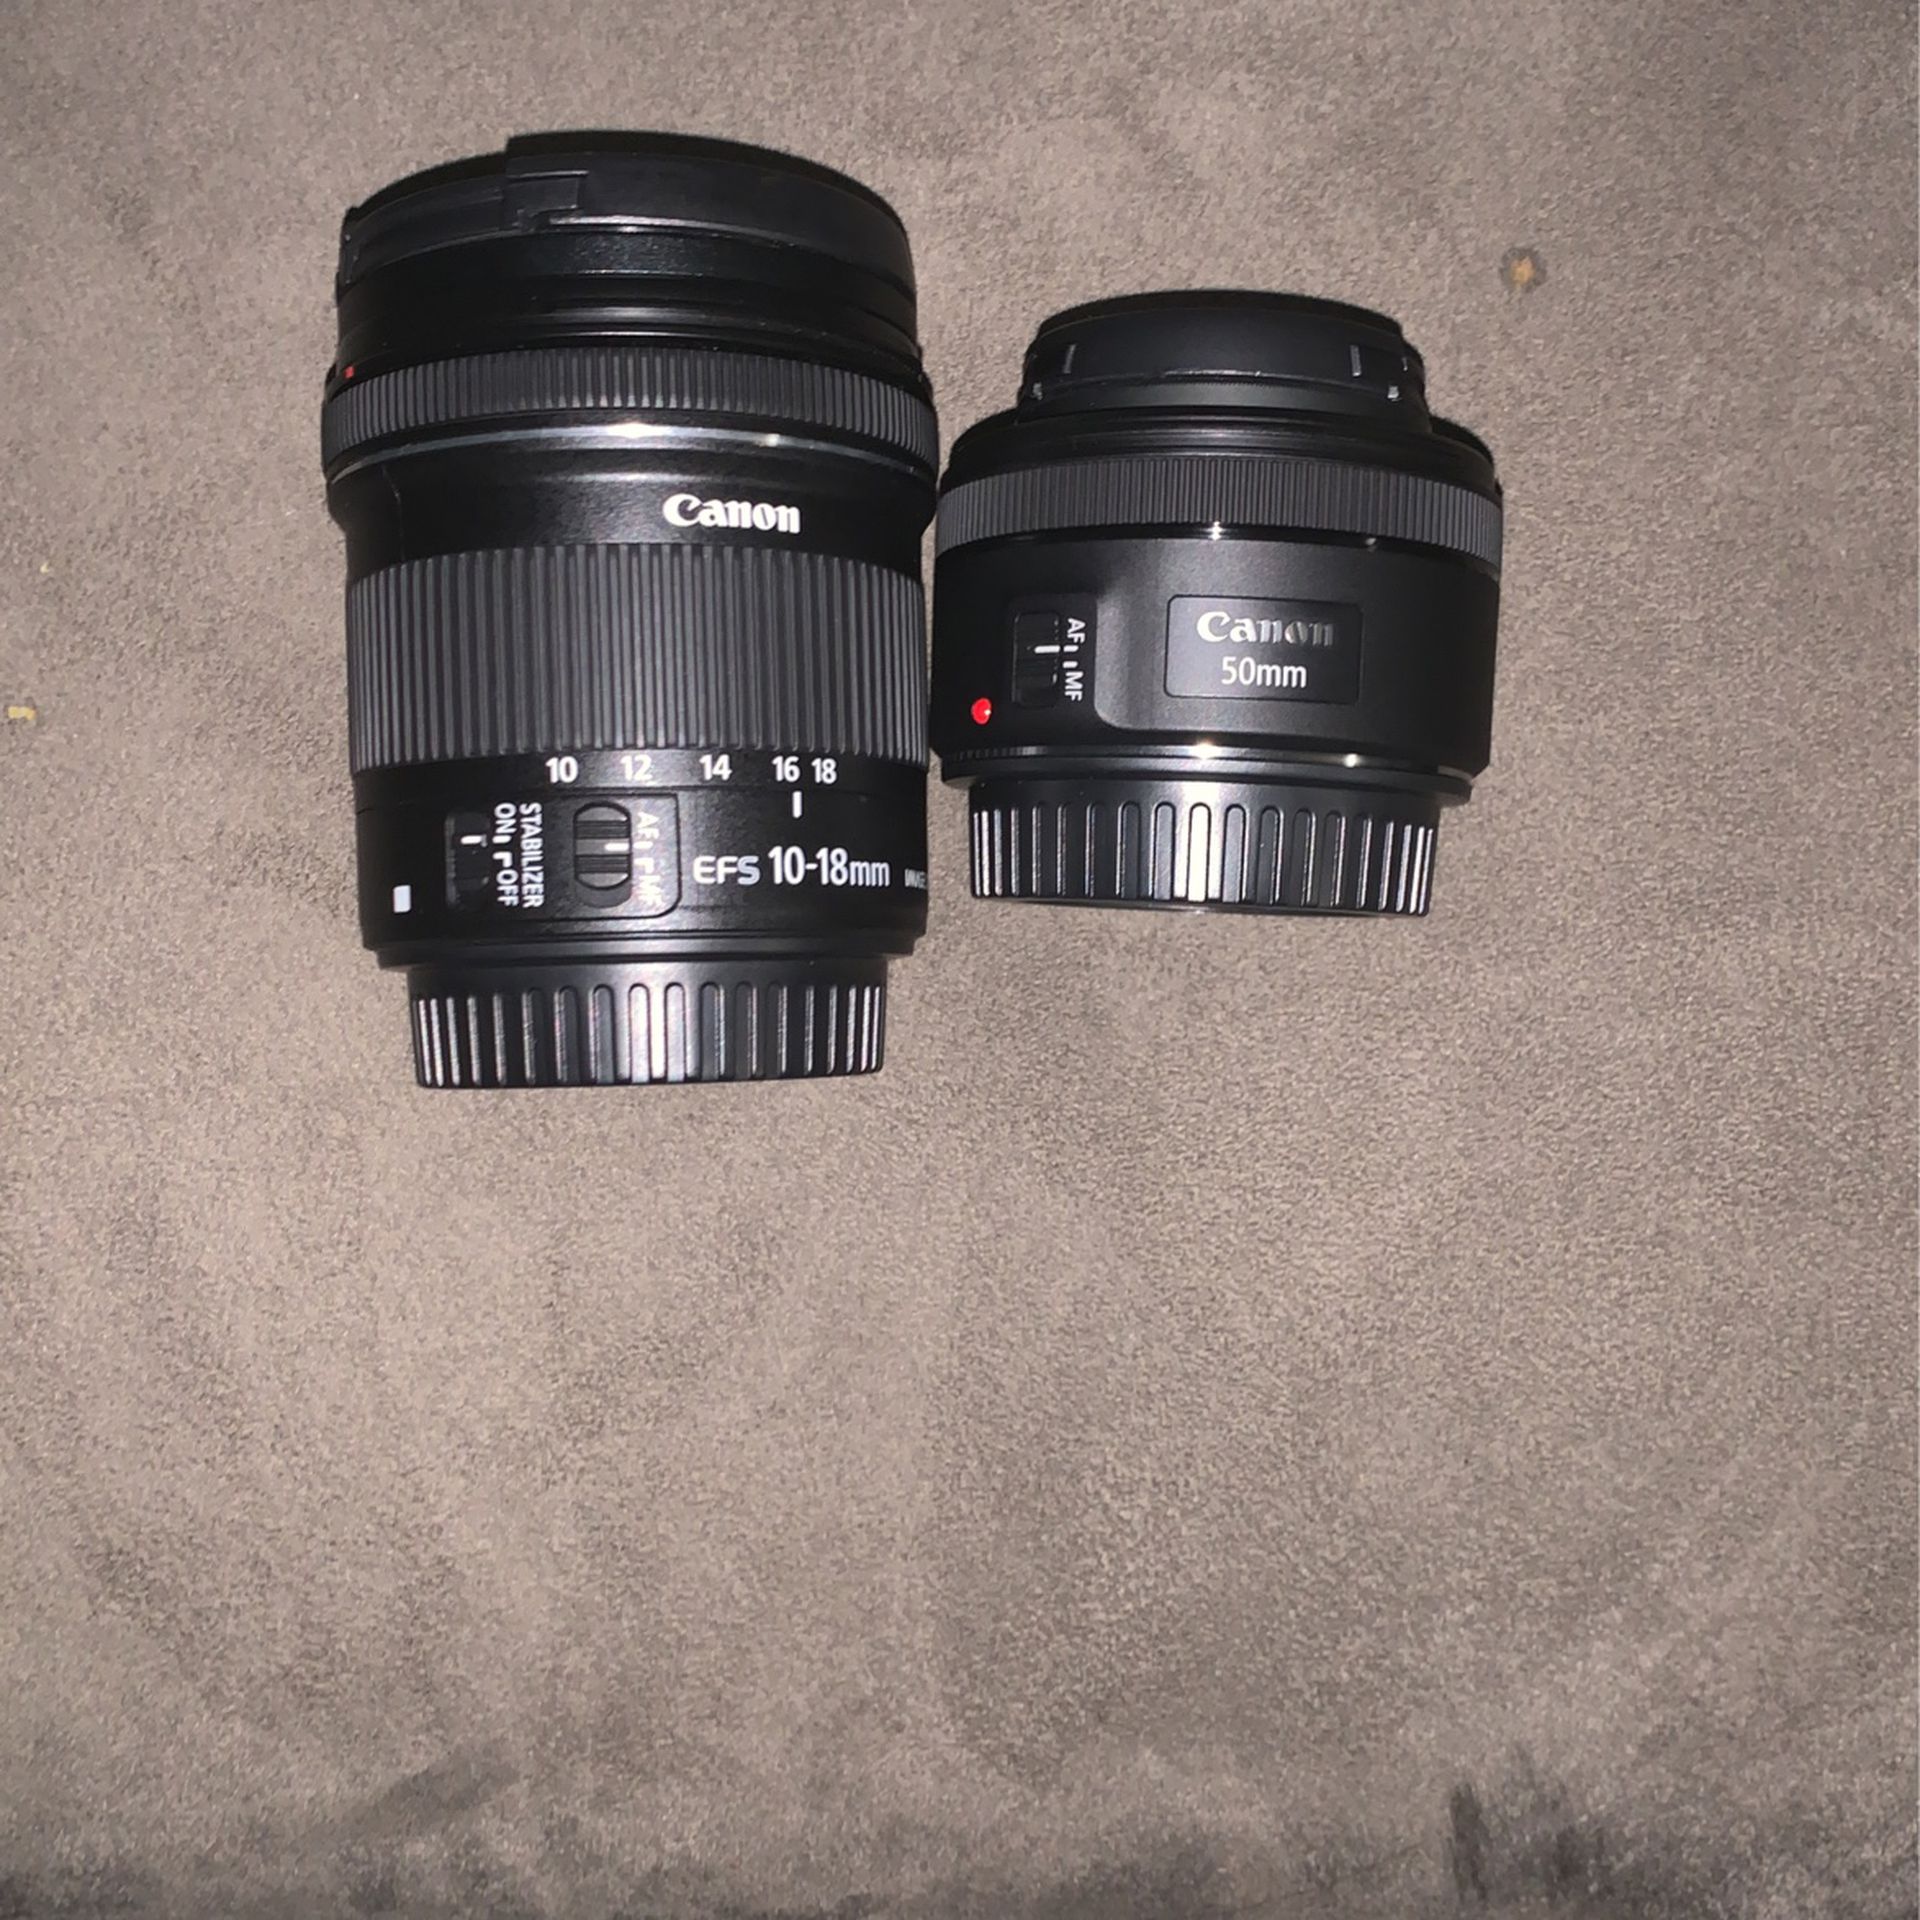 10-18mm And 50mm Canon Lens 